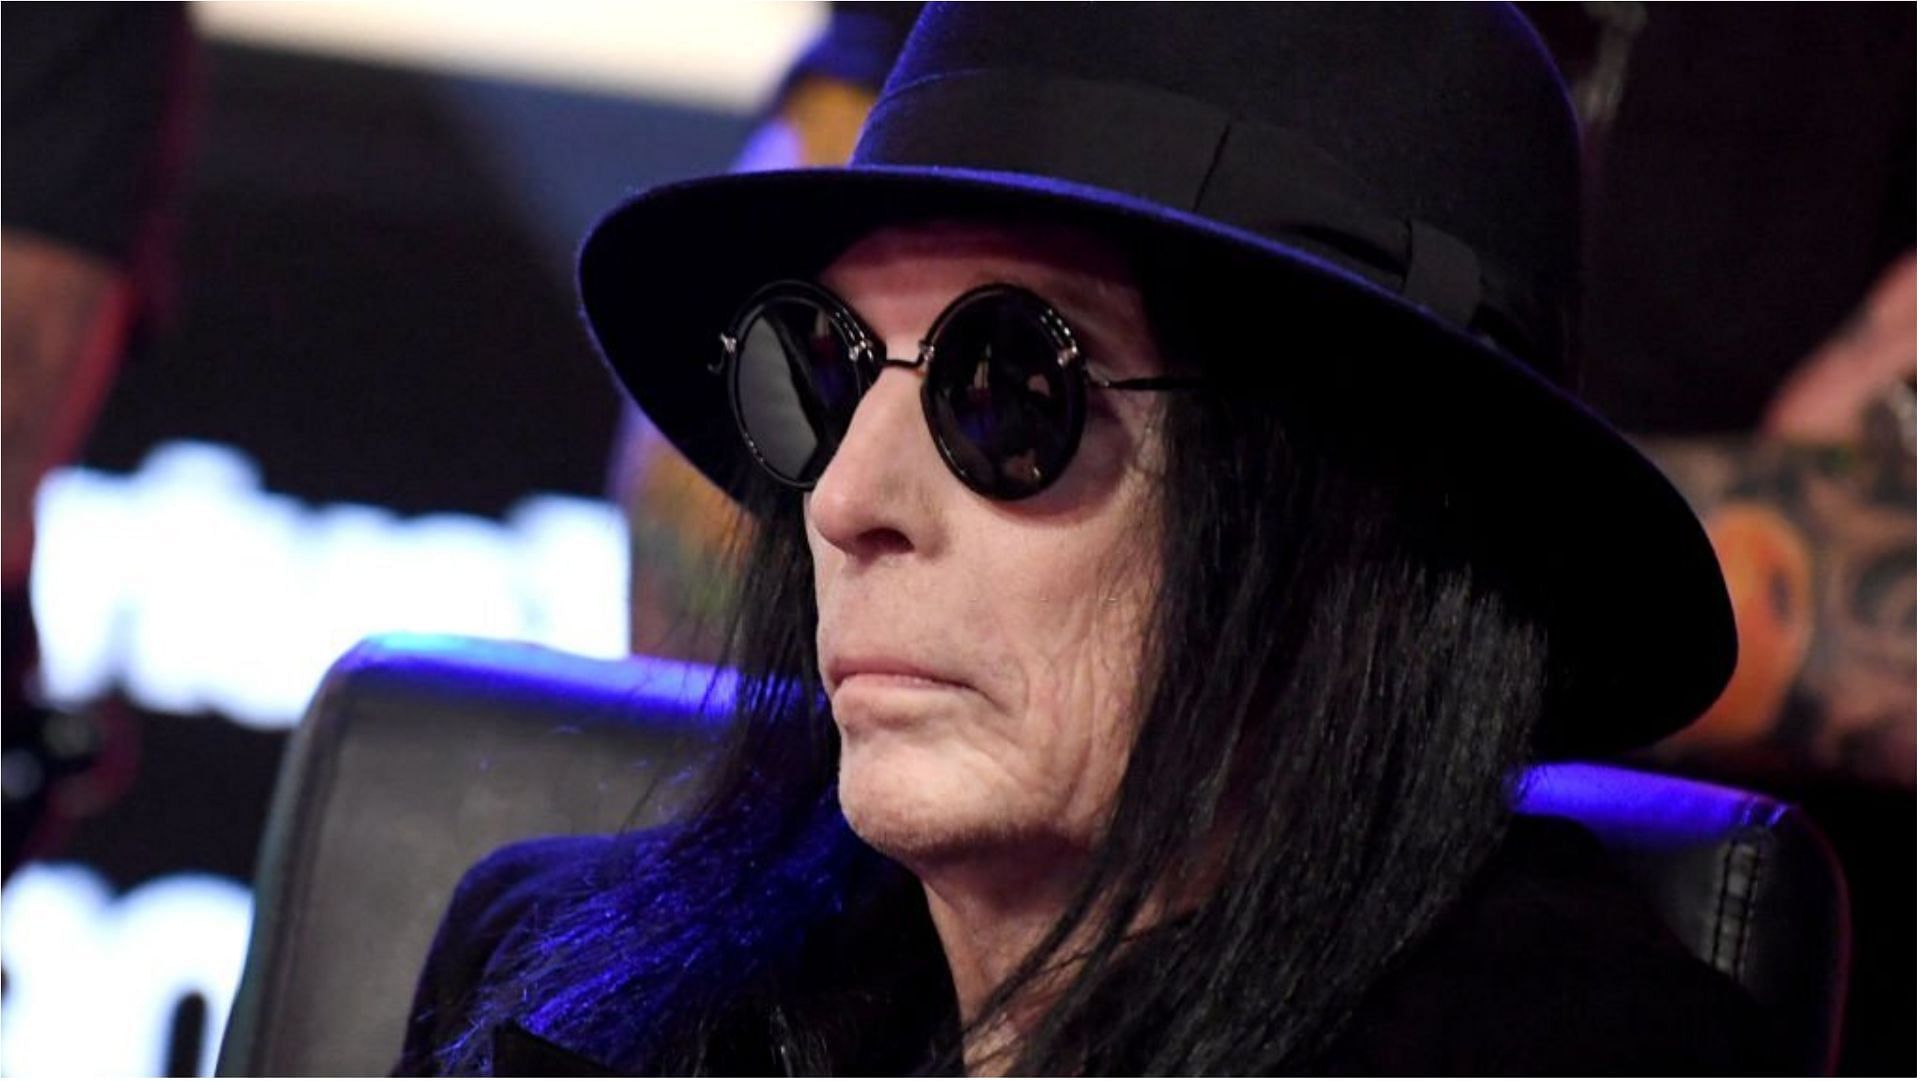 Mick Mars is a well-known musician, guitarist and co-founder of Motley Crue (Image via Kevin Winter/Getty Images)